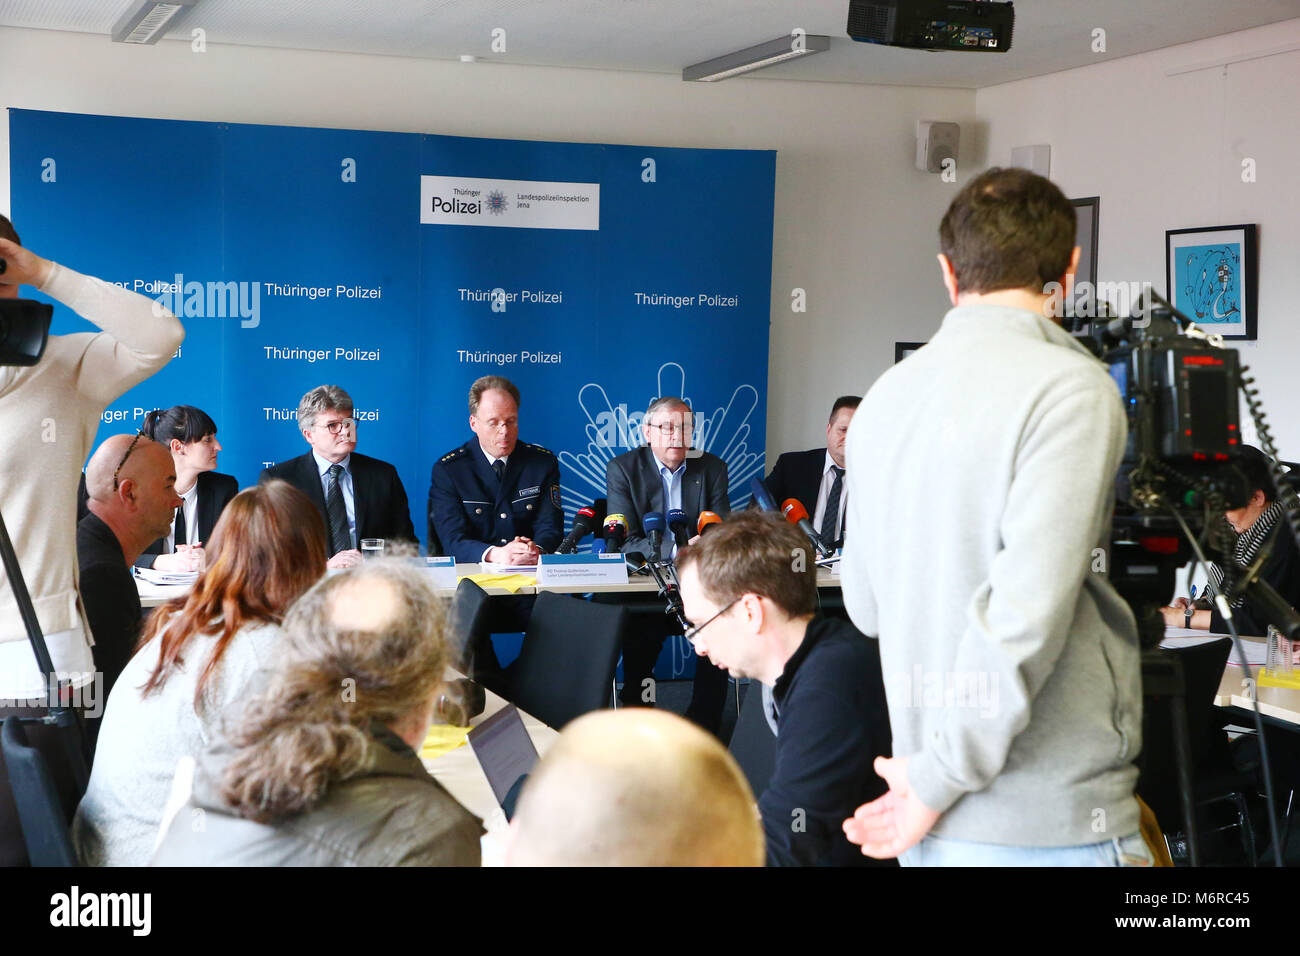 06 March 2018, Germany, Jena: Representatives from the Jena Police and the Gera public prosecutor speaking to the media during a press conference by the Jena Police. The reason for the press conference is the resolution of the 1991 case of Stephanie Drew's murder. A man suspected of the crime was arrested as part of the investigation. The case is the oldest of three cases of child murder in Jena and Weimar under investigation by the special commission 'Cold cases' since November 2016. Photo: Bodo Schackow/dpa-Zentralbild/dpa Stock Photo